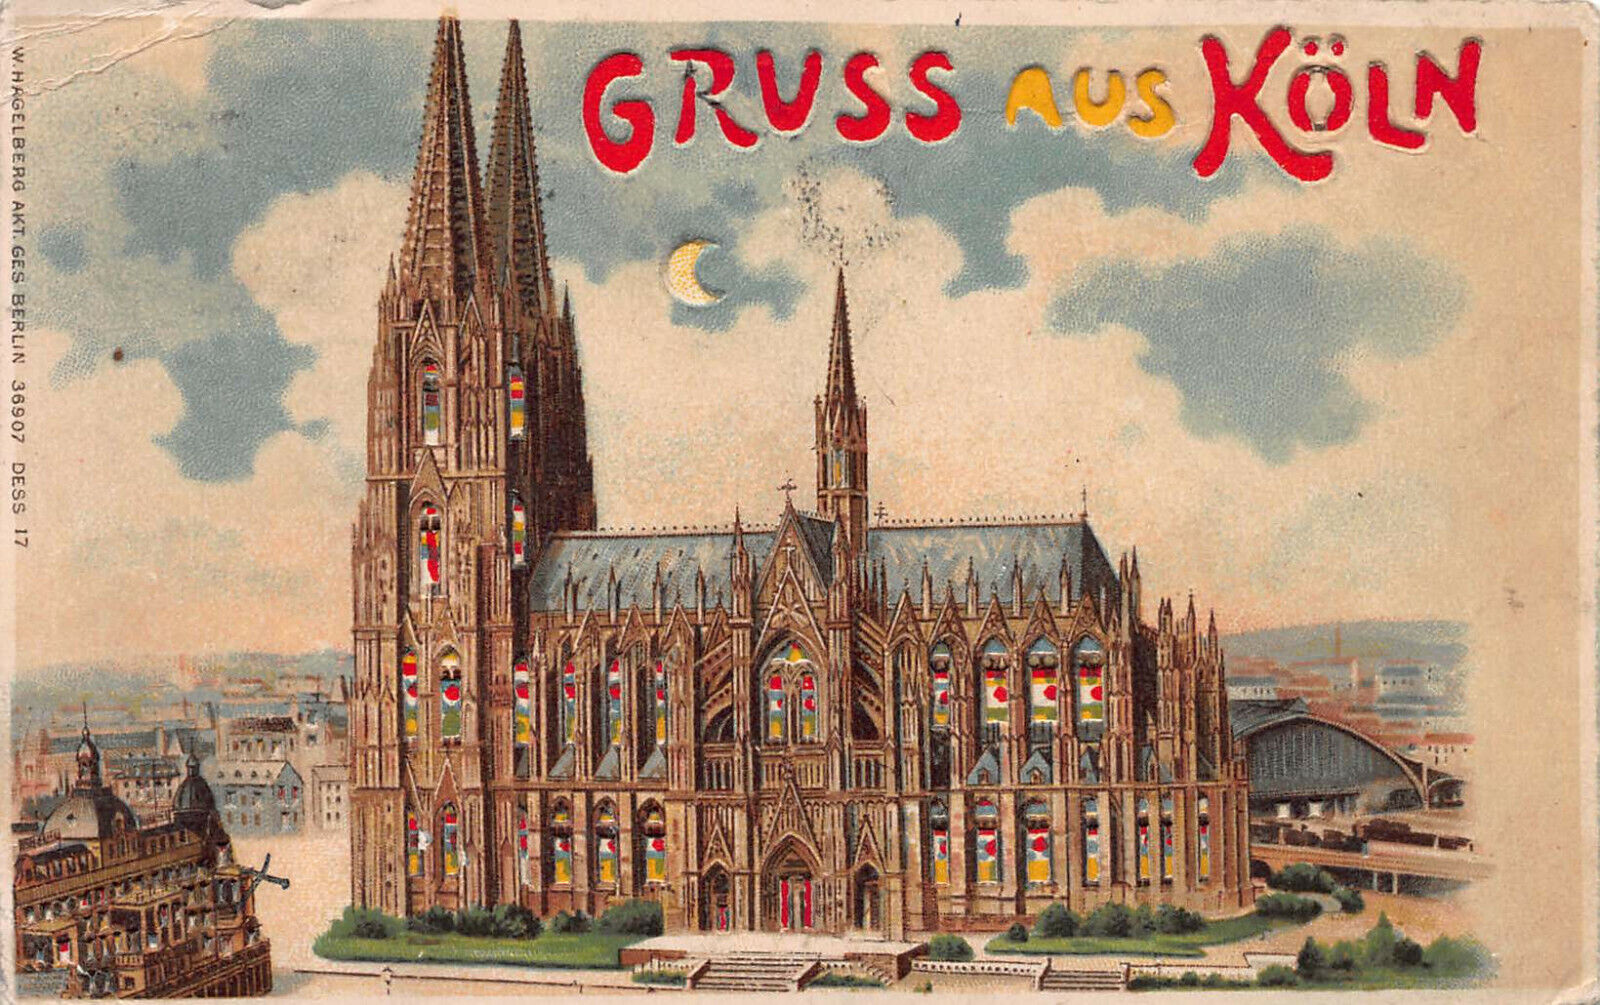 Gruss Aus Koln, Greetings from Cologne, Germany, 1908 Hold-to-Light Postcard